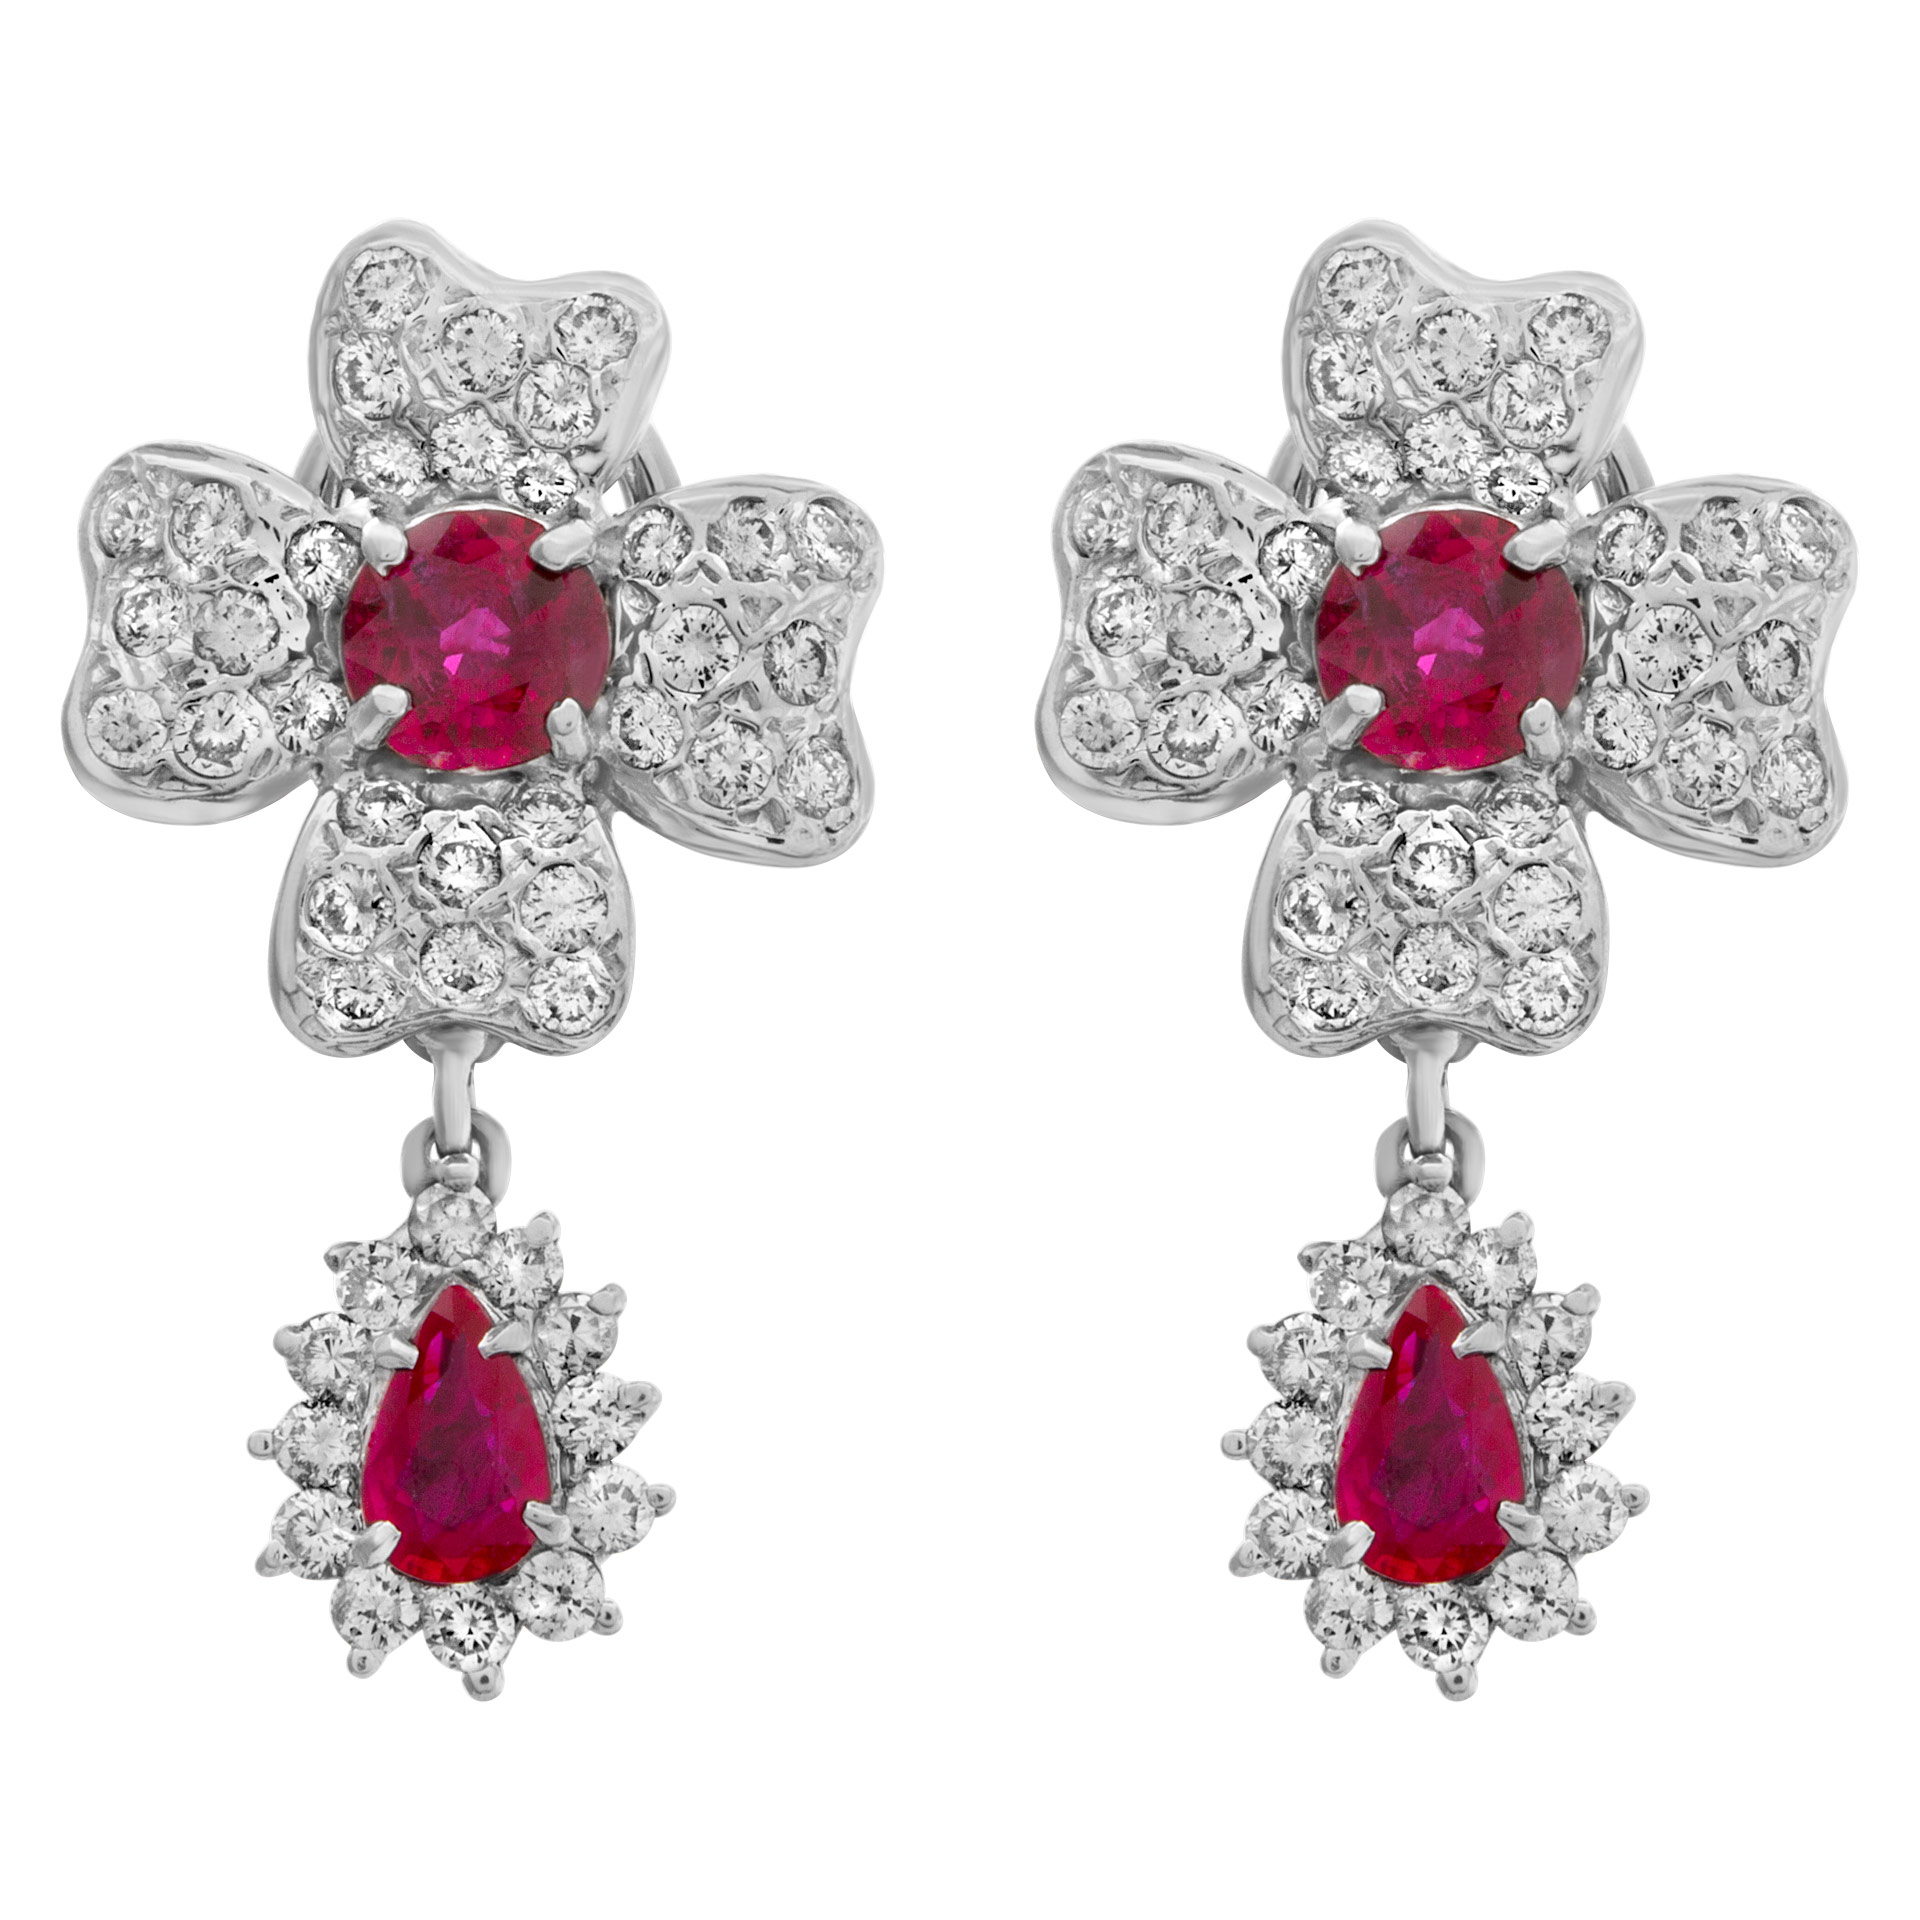 Diamond and ruby floral design earrings in 18k white gold.